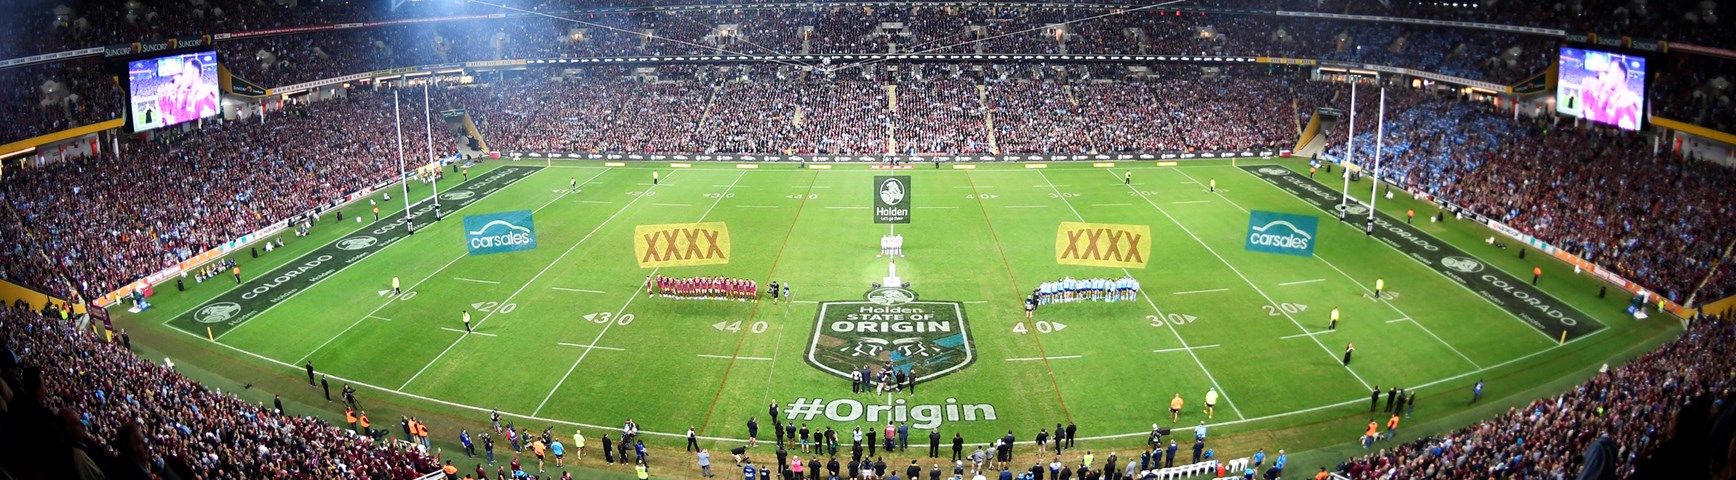 Image result for brisbane rugby league stadium